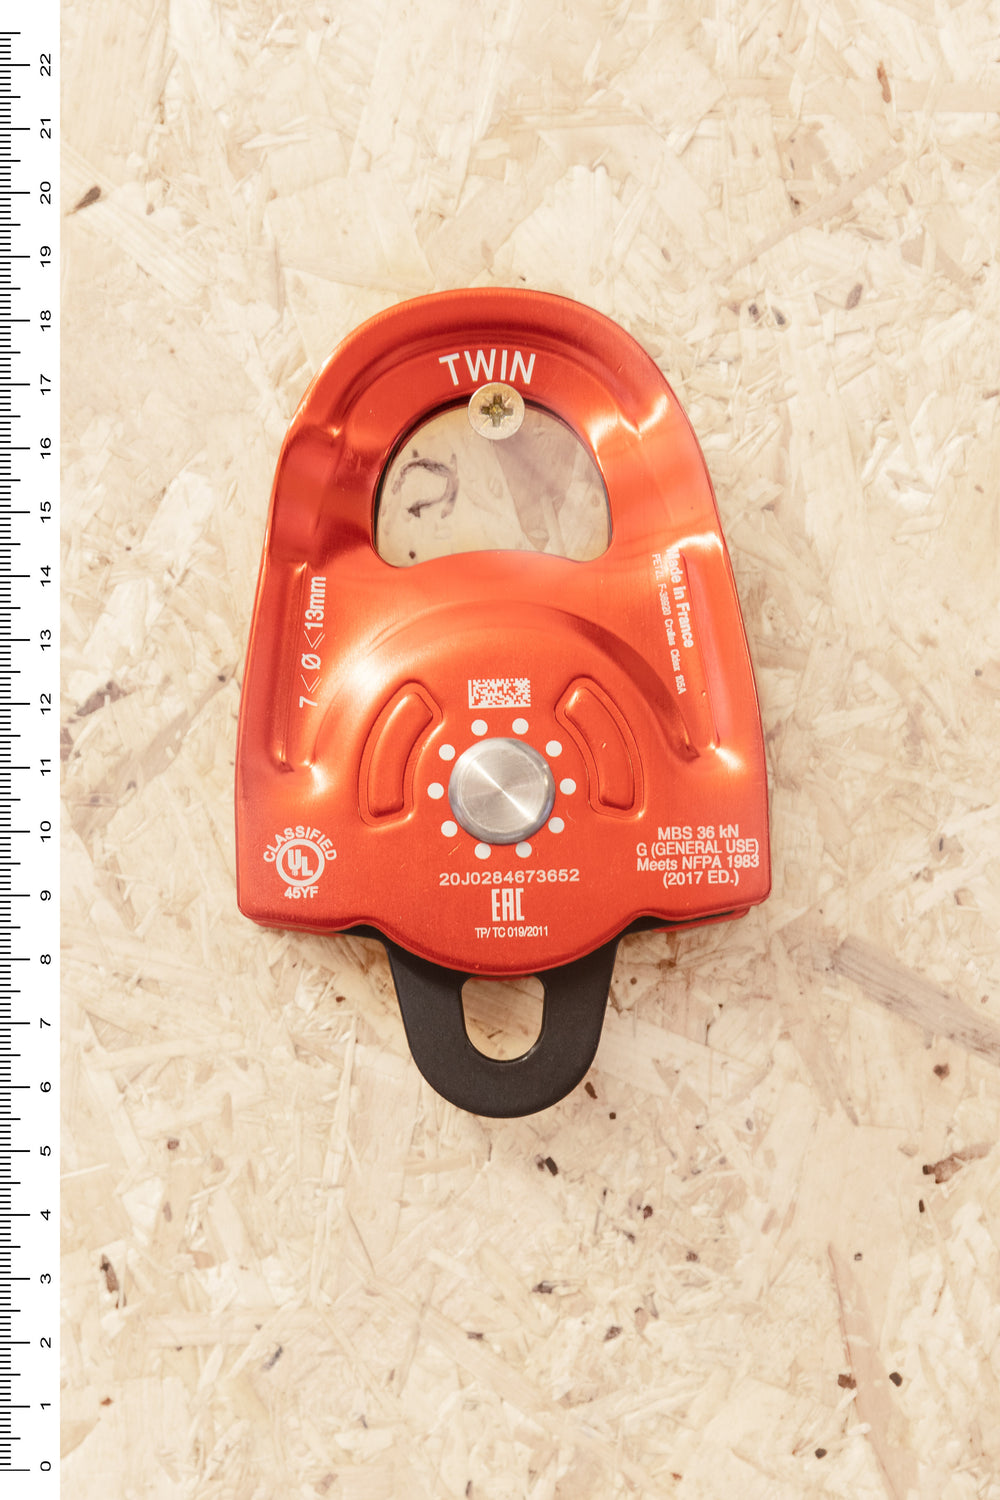 Petzl - Twin Pulley